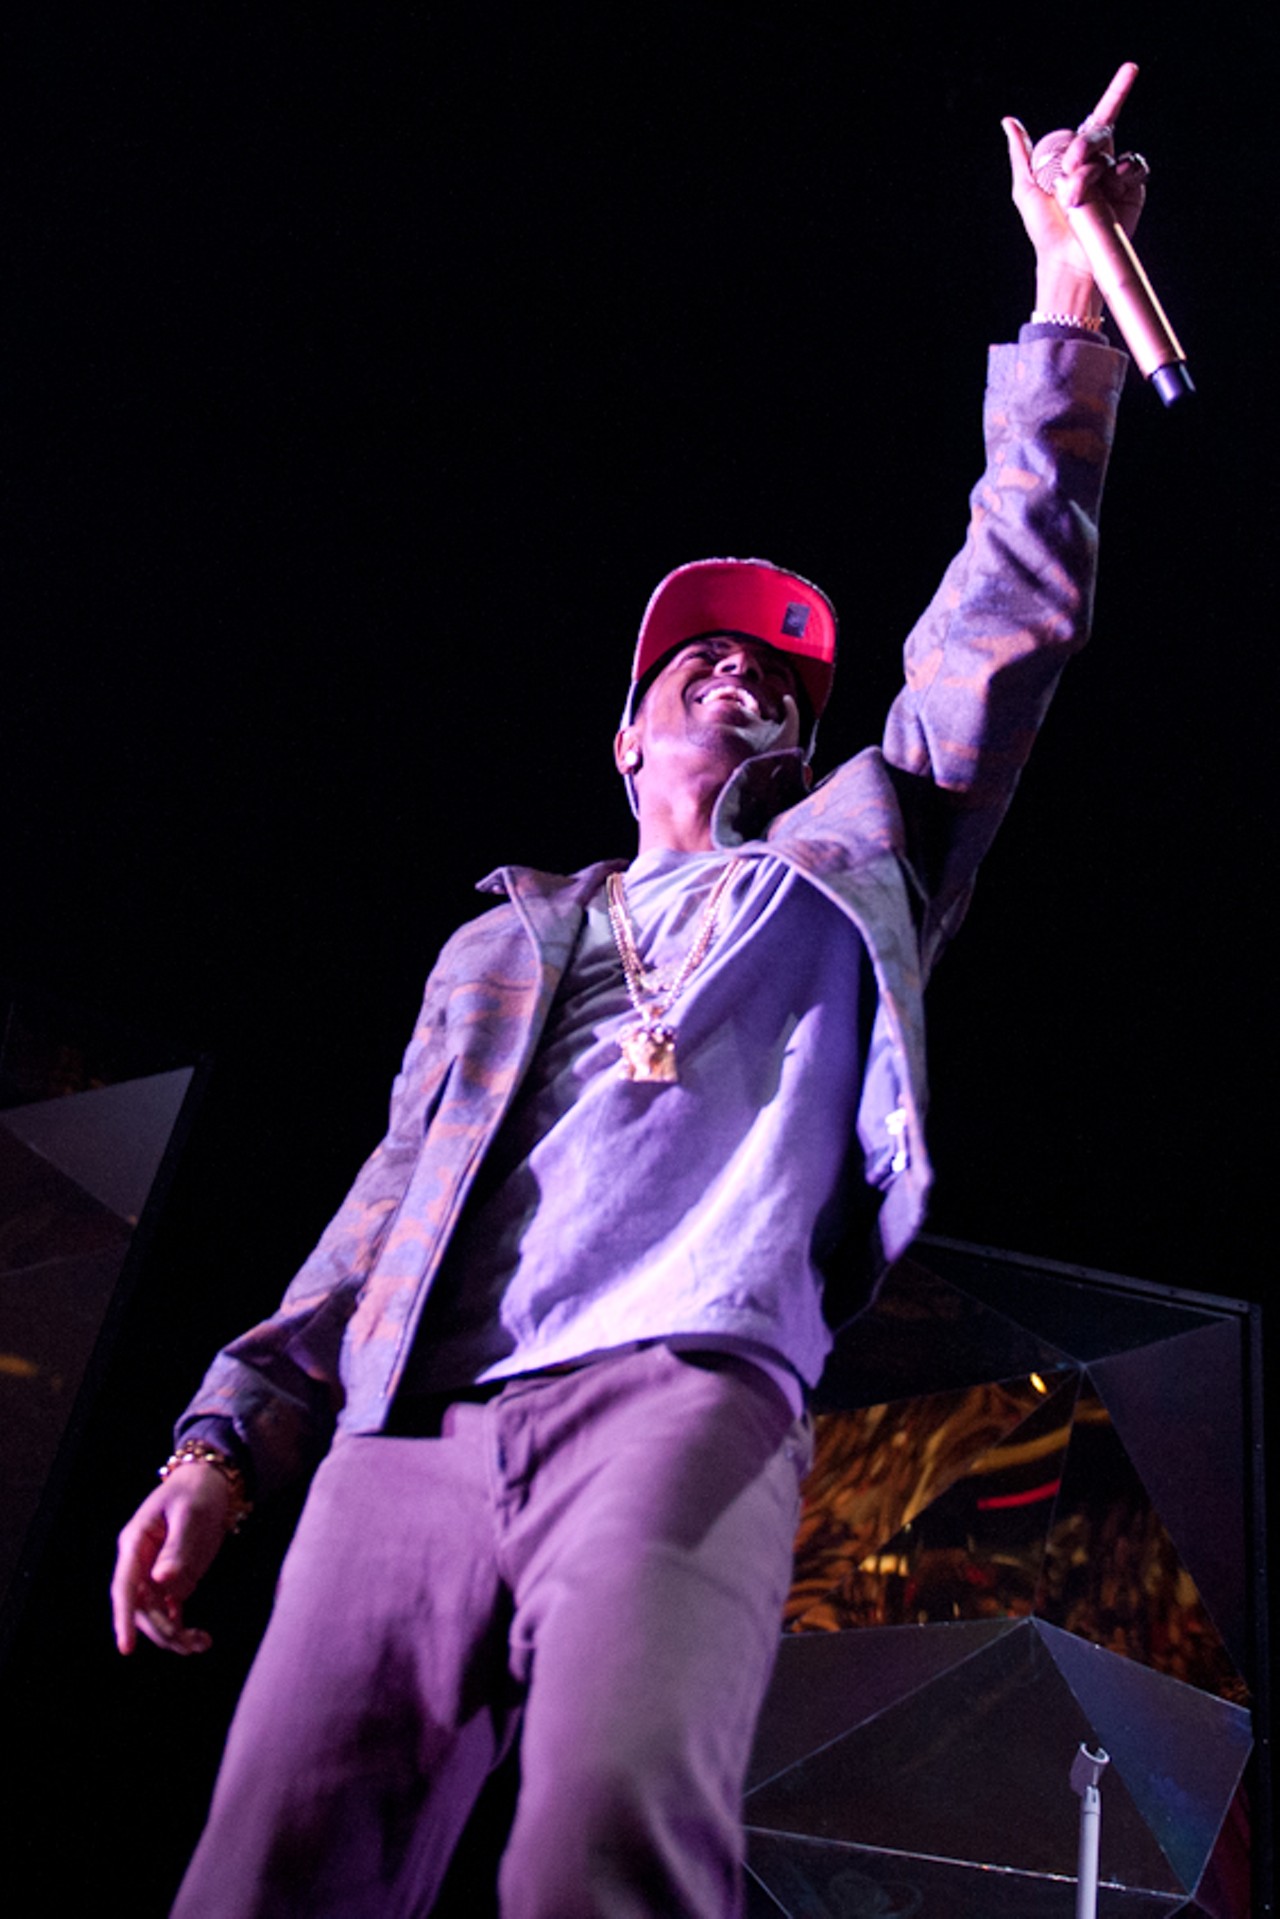 Big Sean opens up for Trey Songz at the Fox Theatre on February 12, 2012.